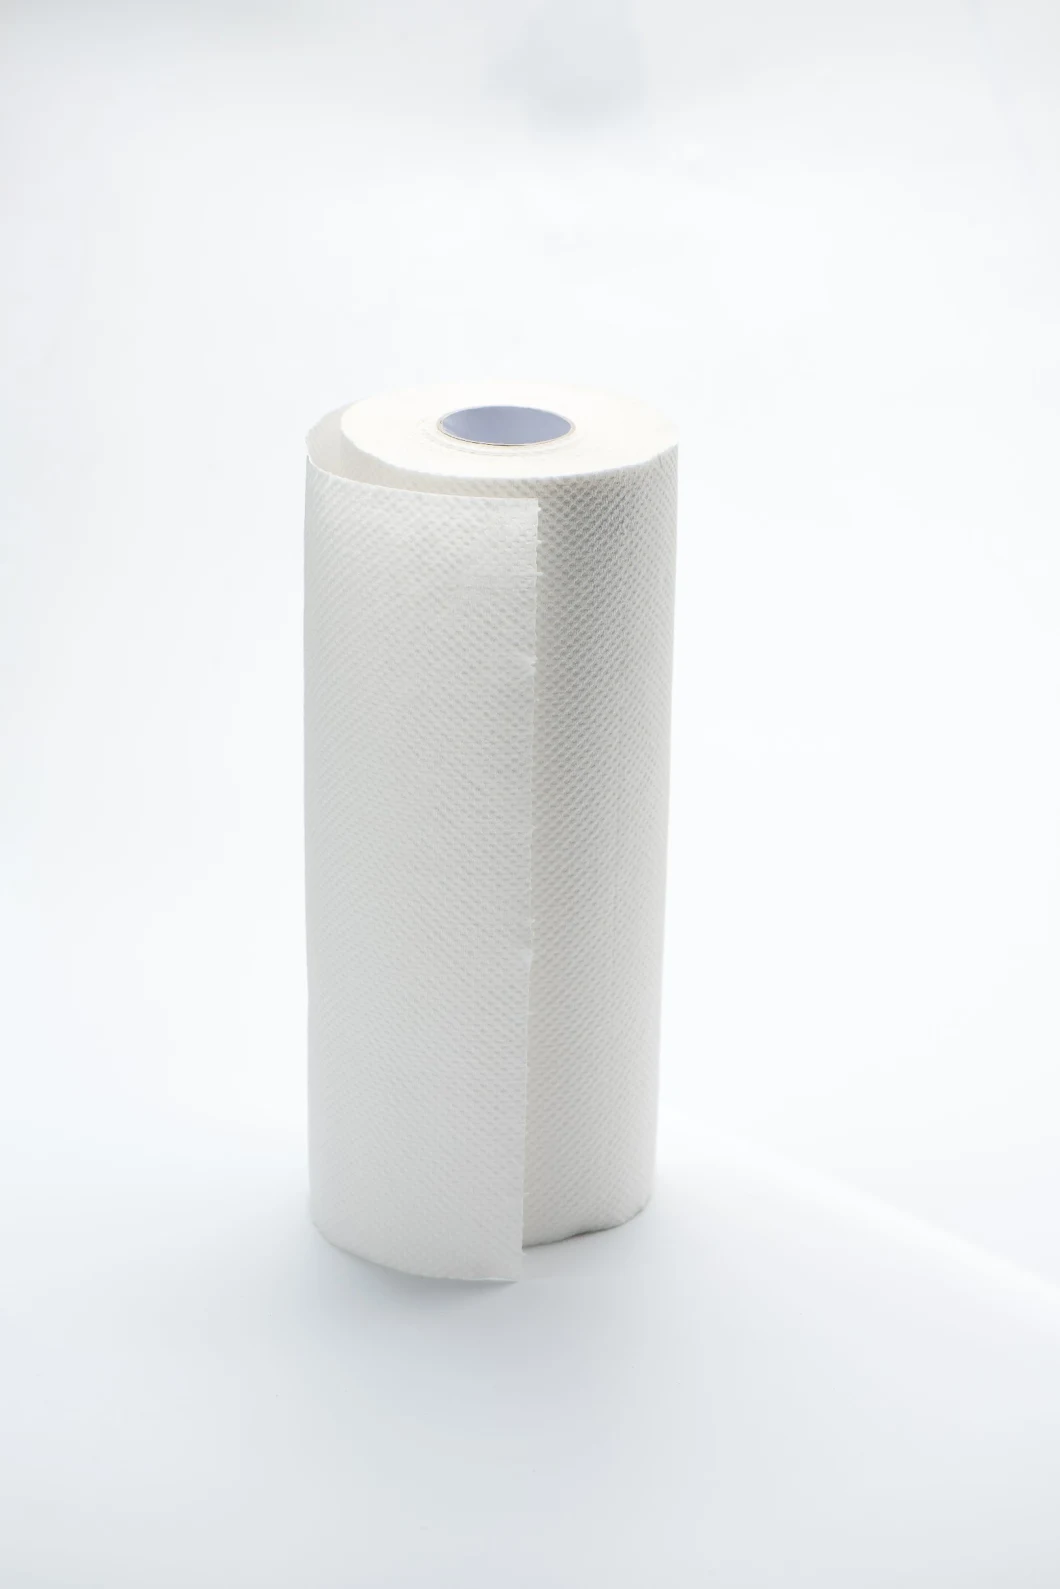 Folding/Roll Hight Quality Kitchen Paper Towel